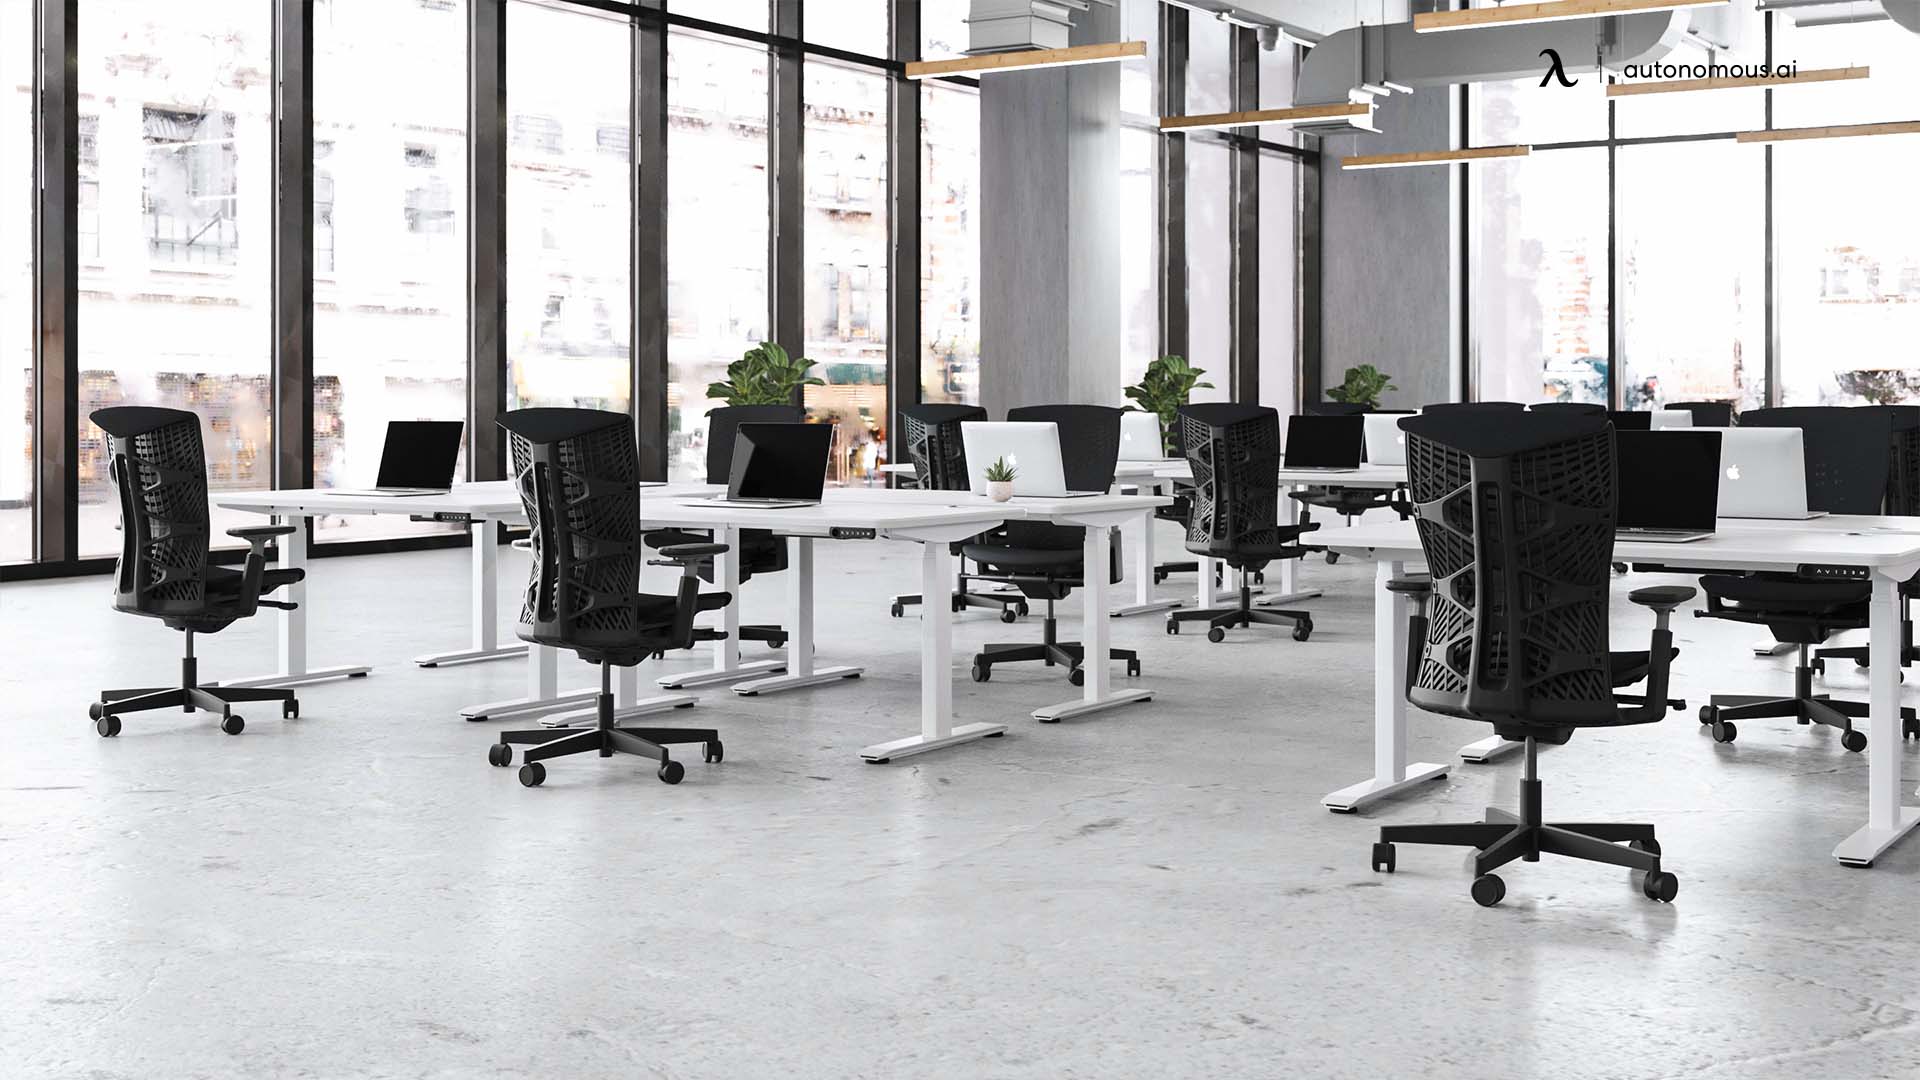 Physical office space isn’t required